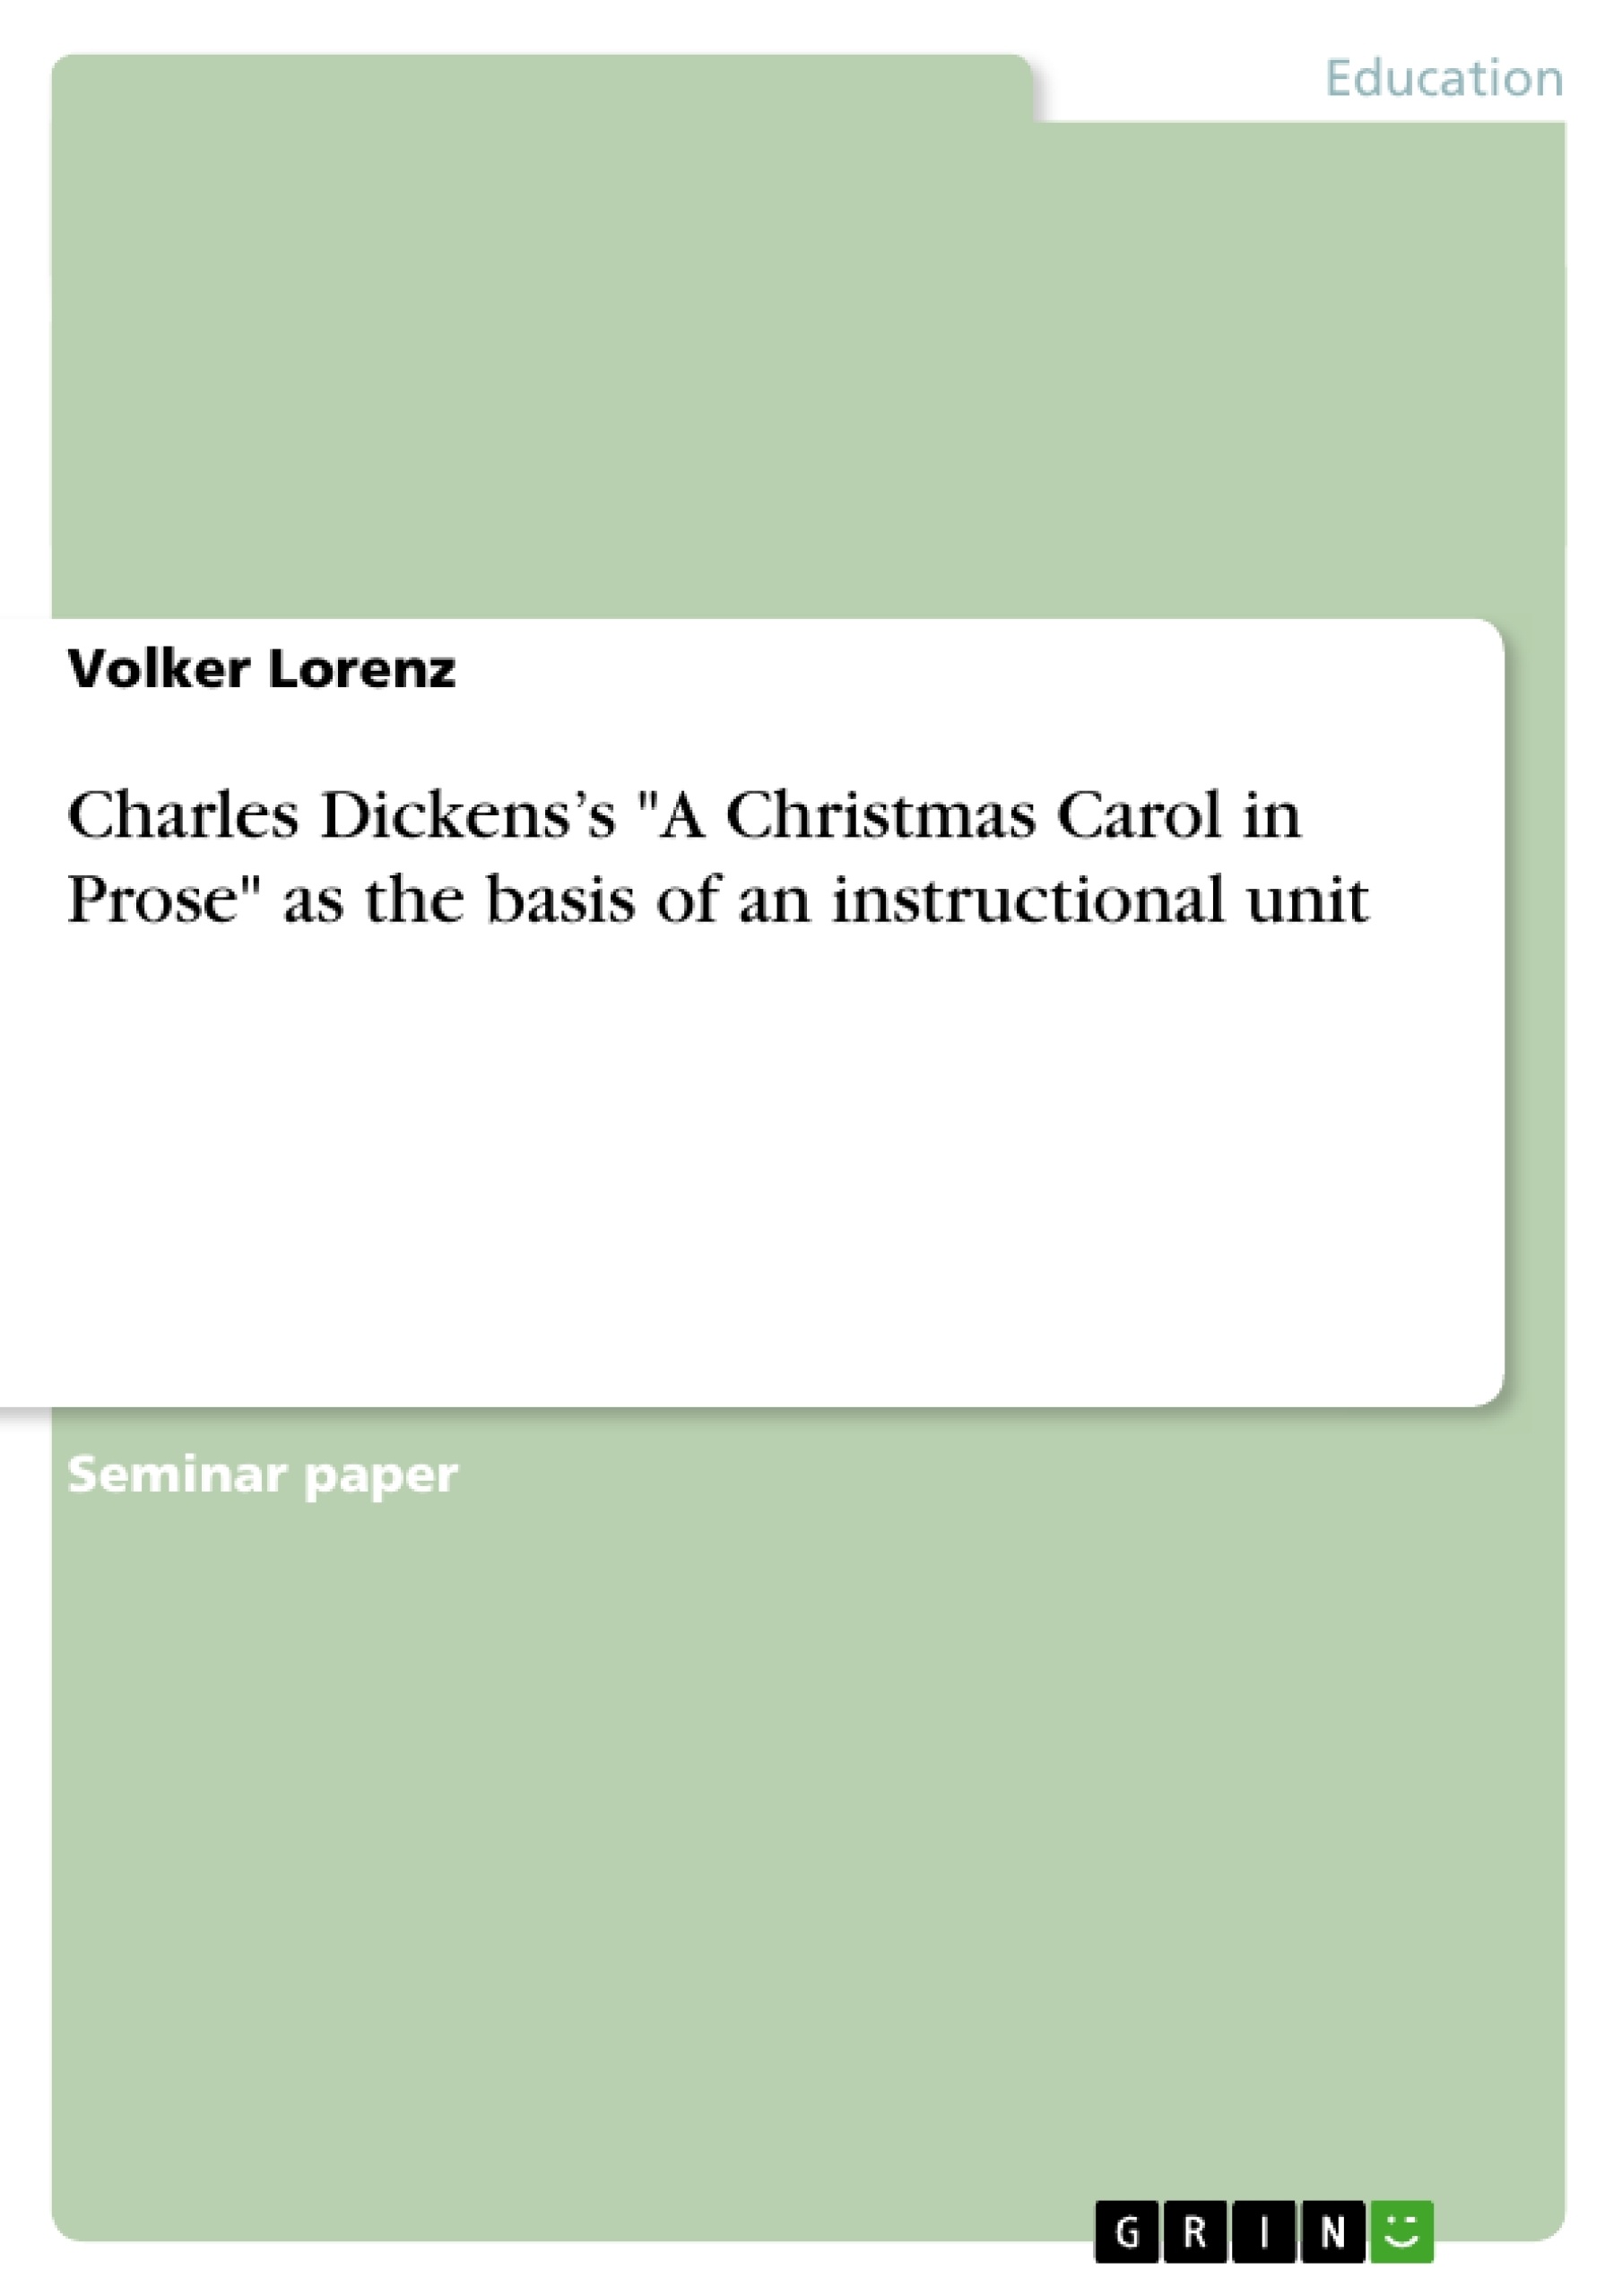 Titre: Charles Dickens’s "A Christmas Carol in Prose"  as the basis of an instructional unit